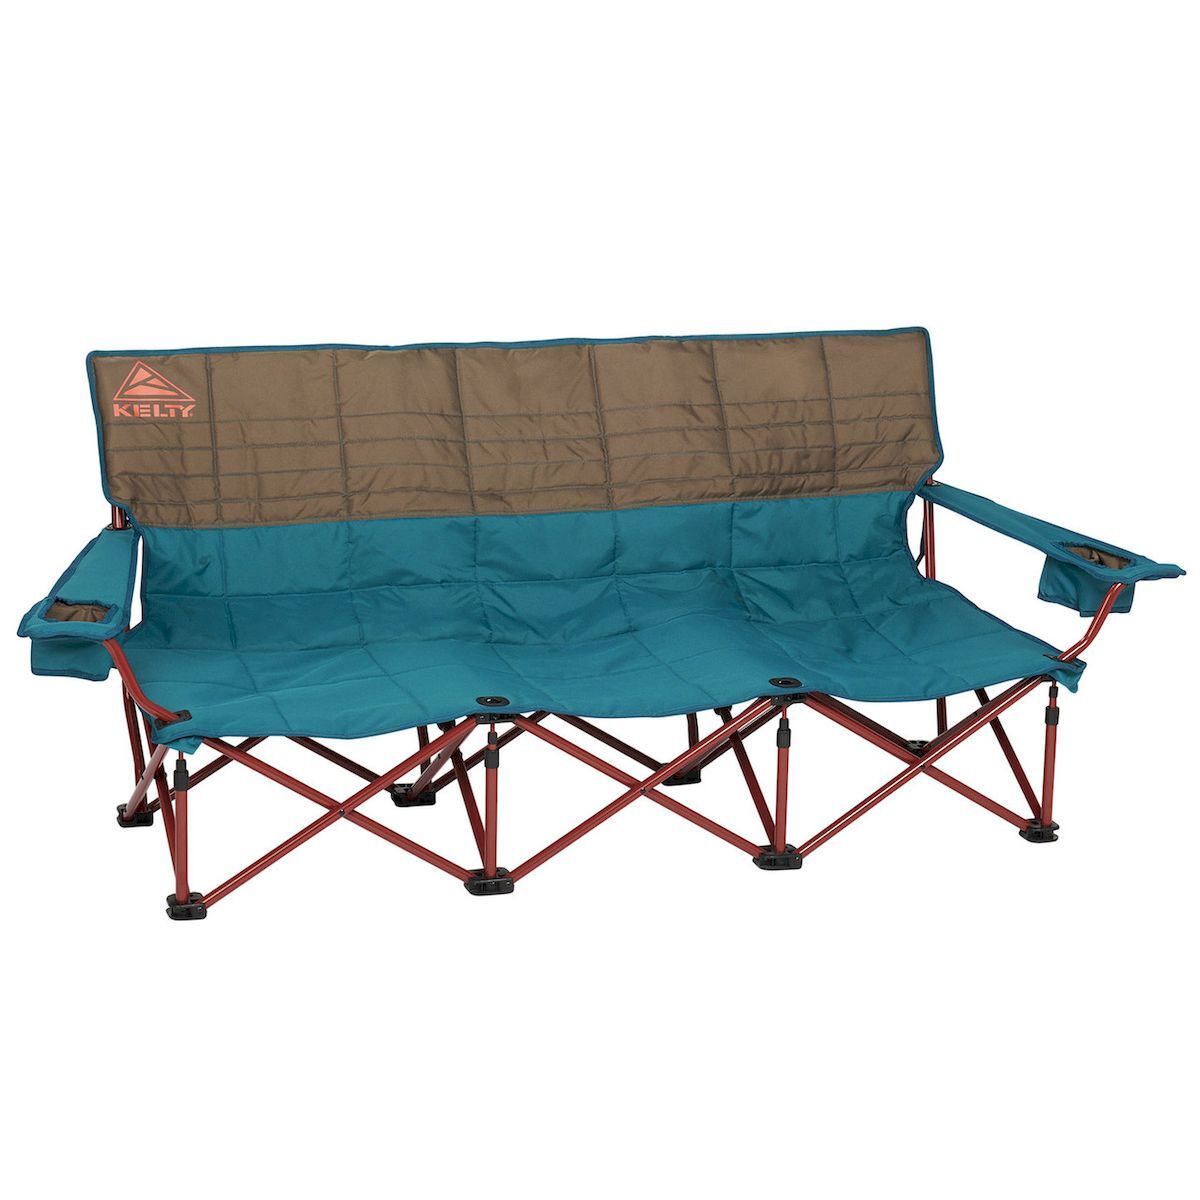 Kelty Lowdown Couch - Camp chair